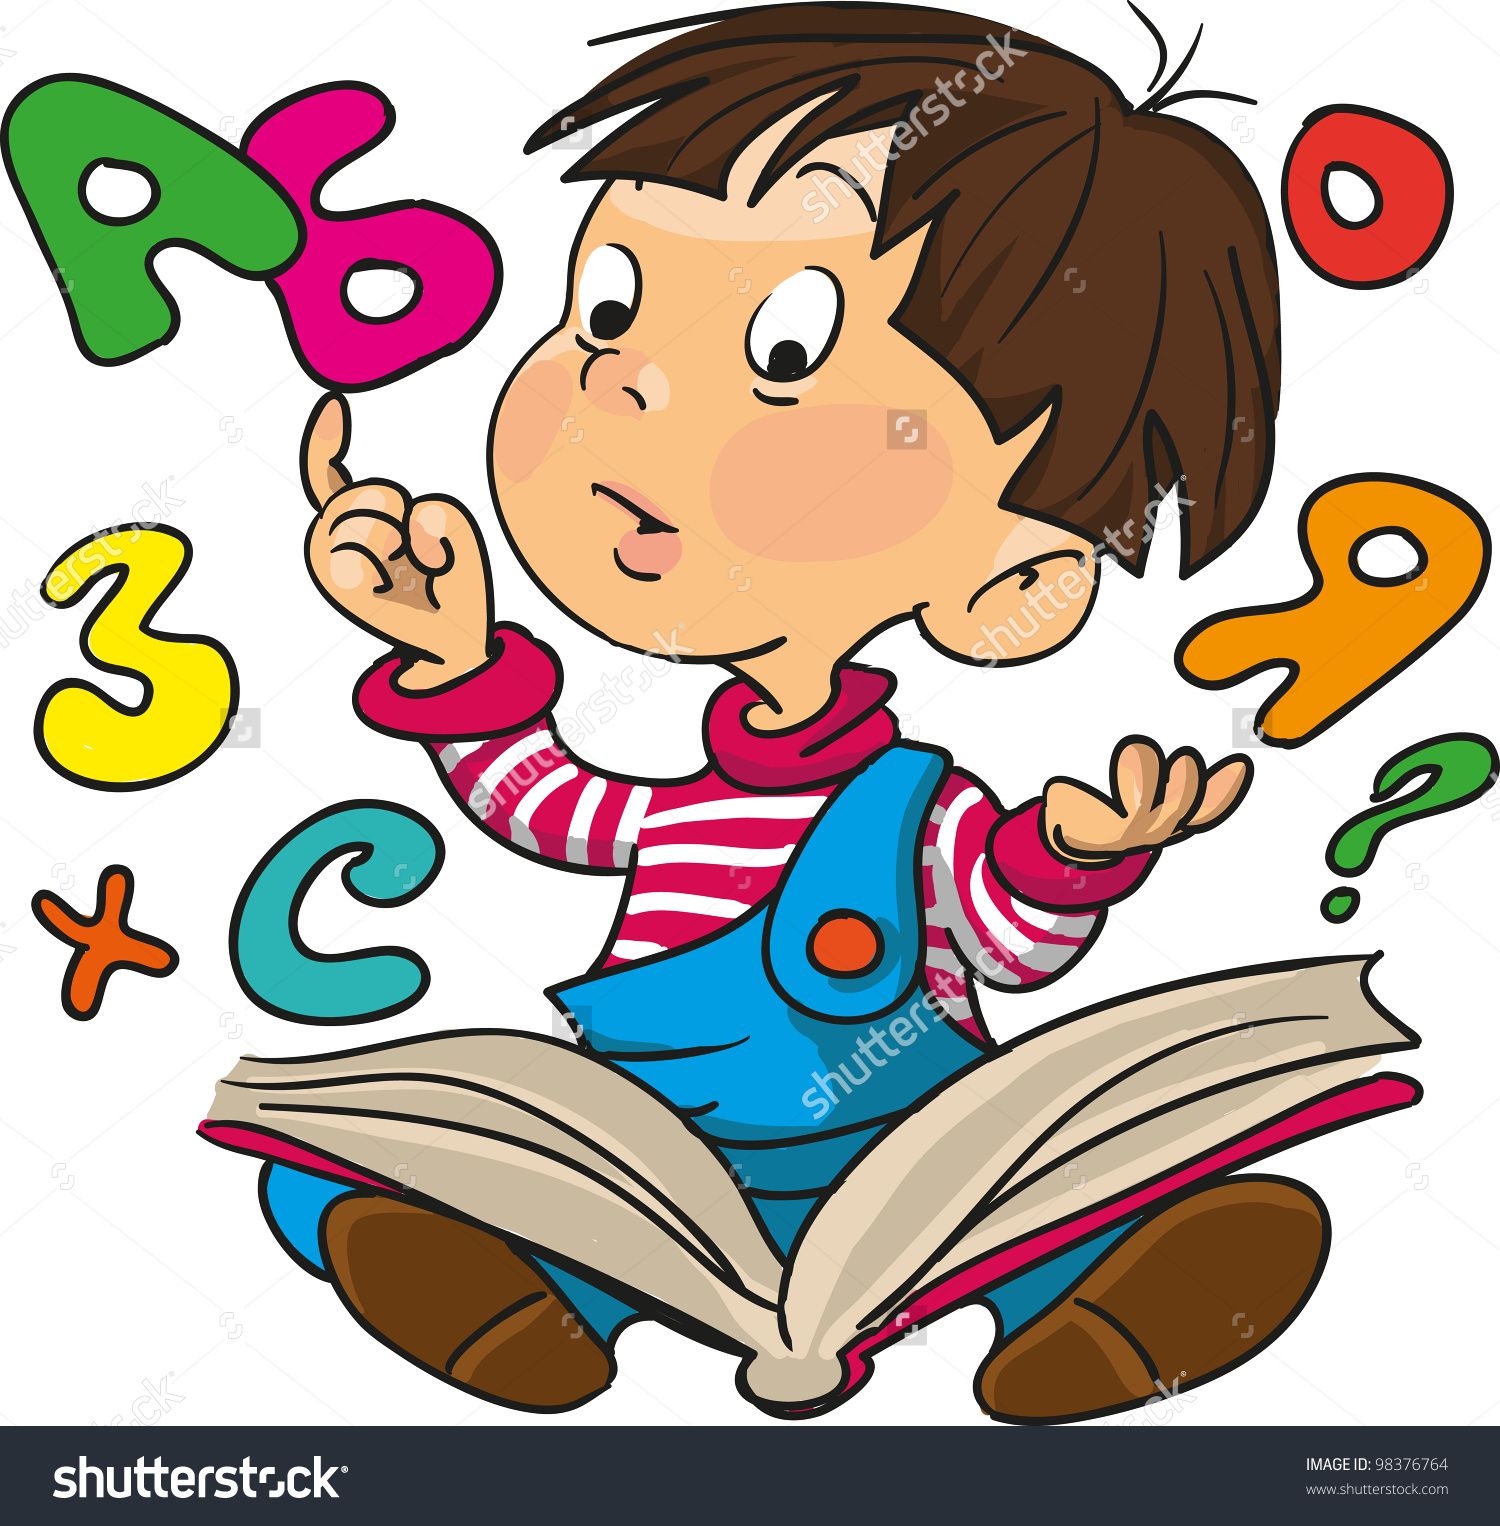 Pictures of a curious. Evidence clipart boy